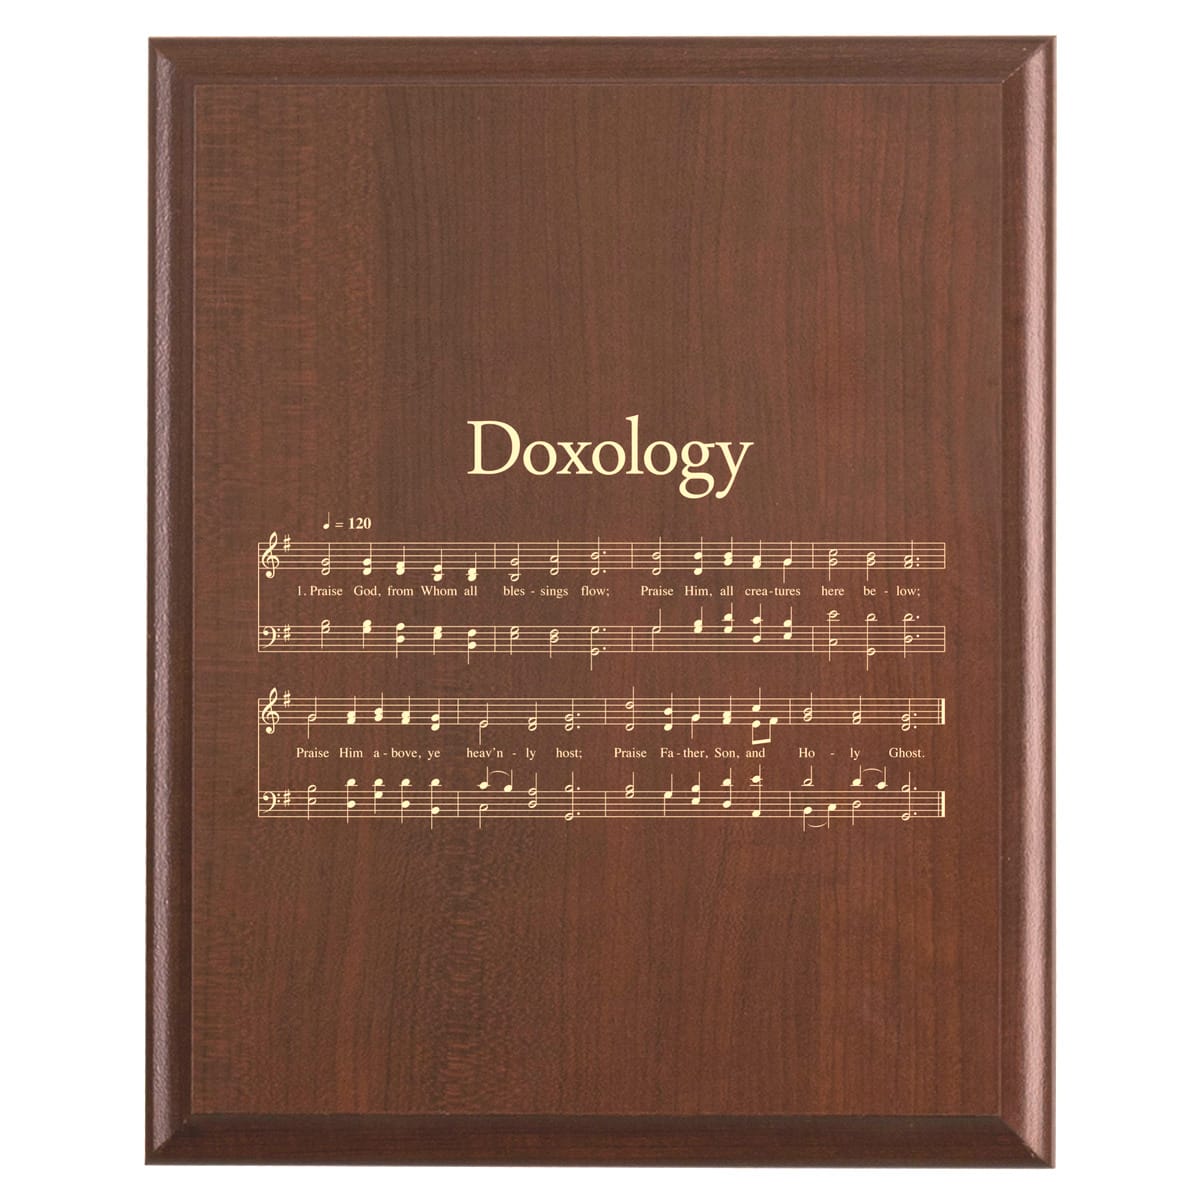 Plaque photo: The Doxology Hymn Plaque design with free personalization. Wood style finish with customized text.